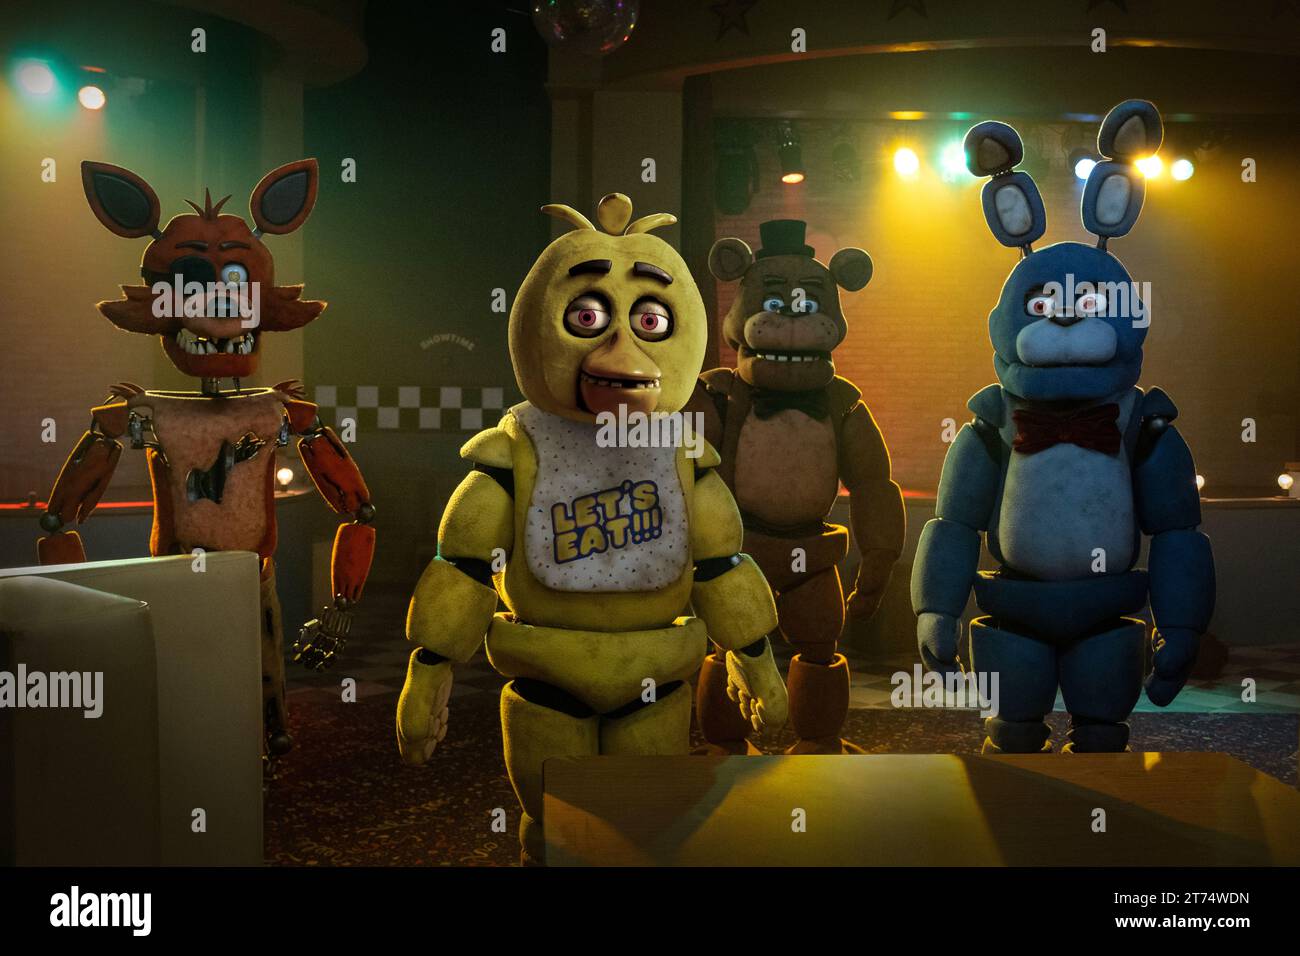 Image - 851323], Five Nights at Freddy's